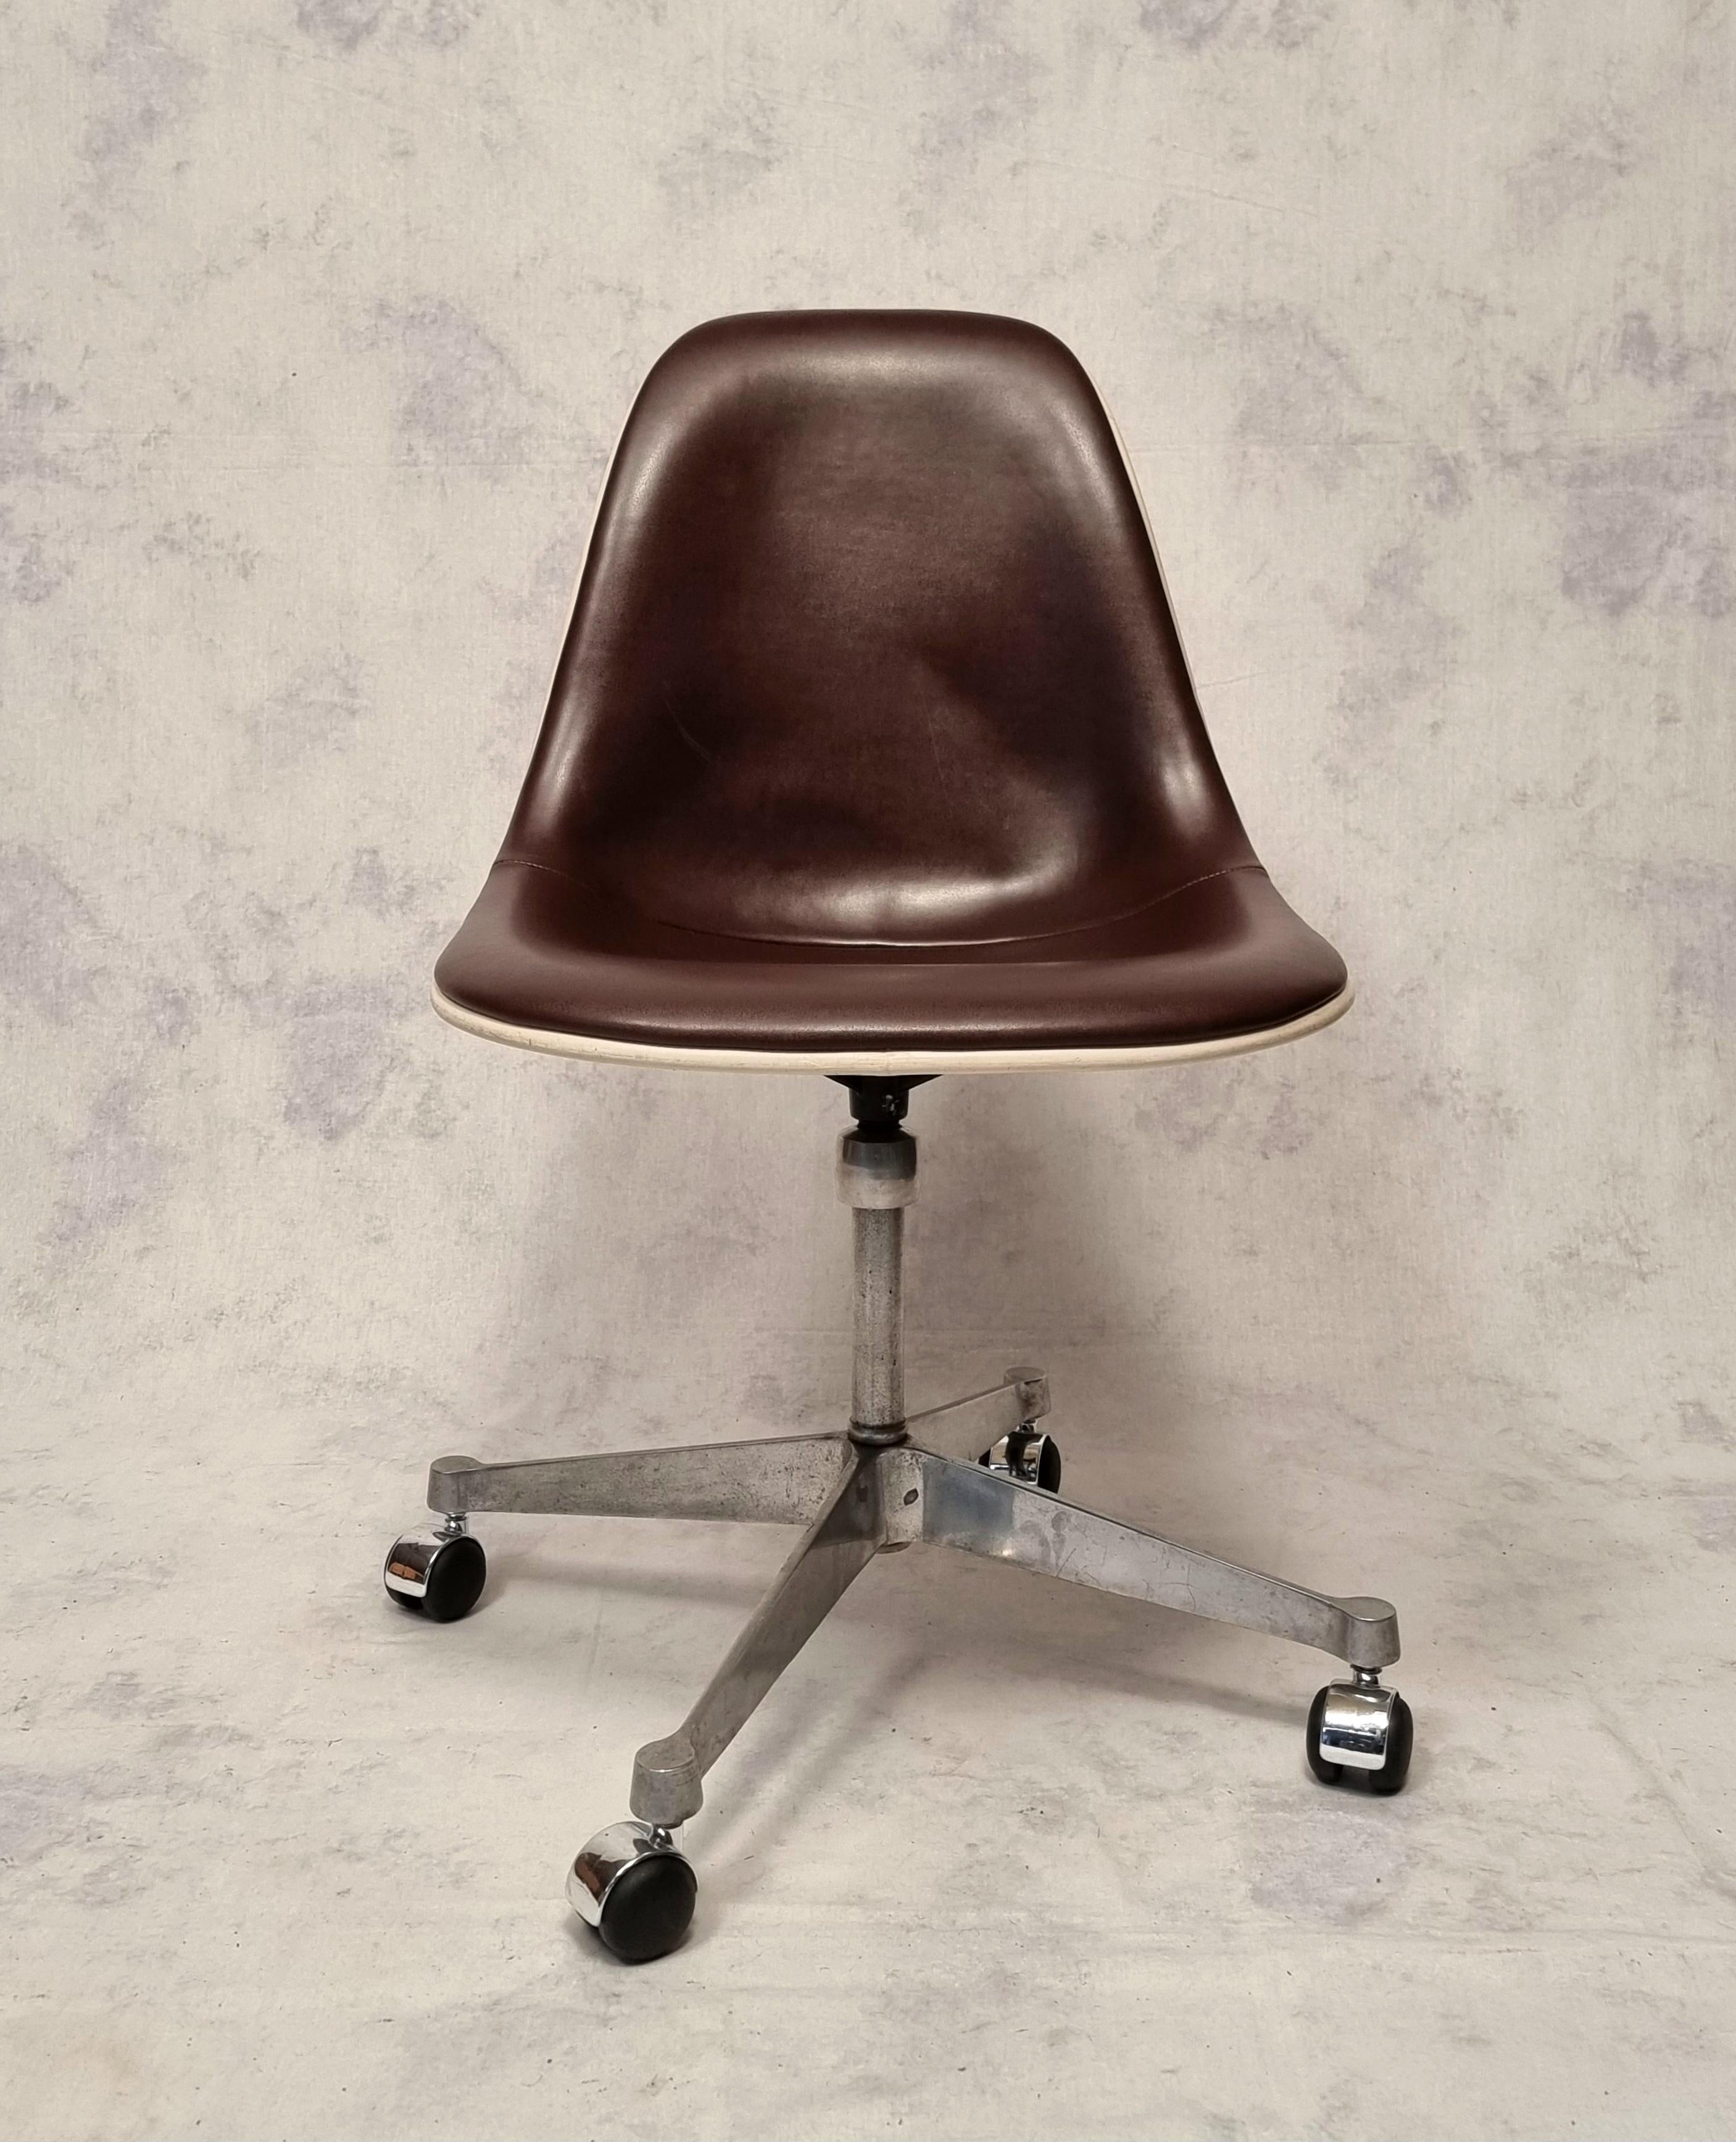 Office chair by American designers Charles and Ray Eames produced by Herman Miller in the 1960s. Charles and Ray Eames are among the most emblematic designers in history, normally creating their lounge chair. Iconic model with fiberglass hull, steel